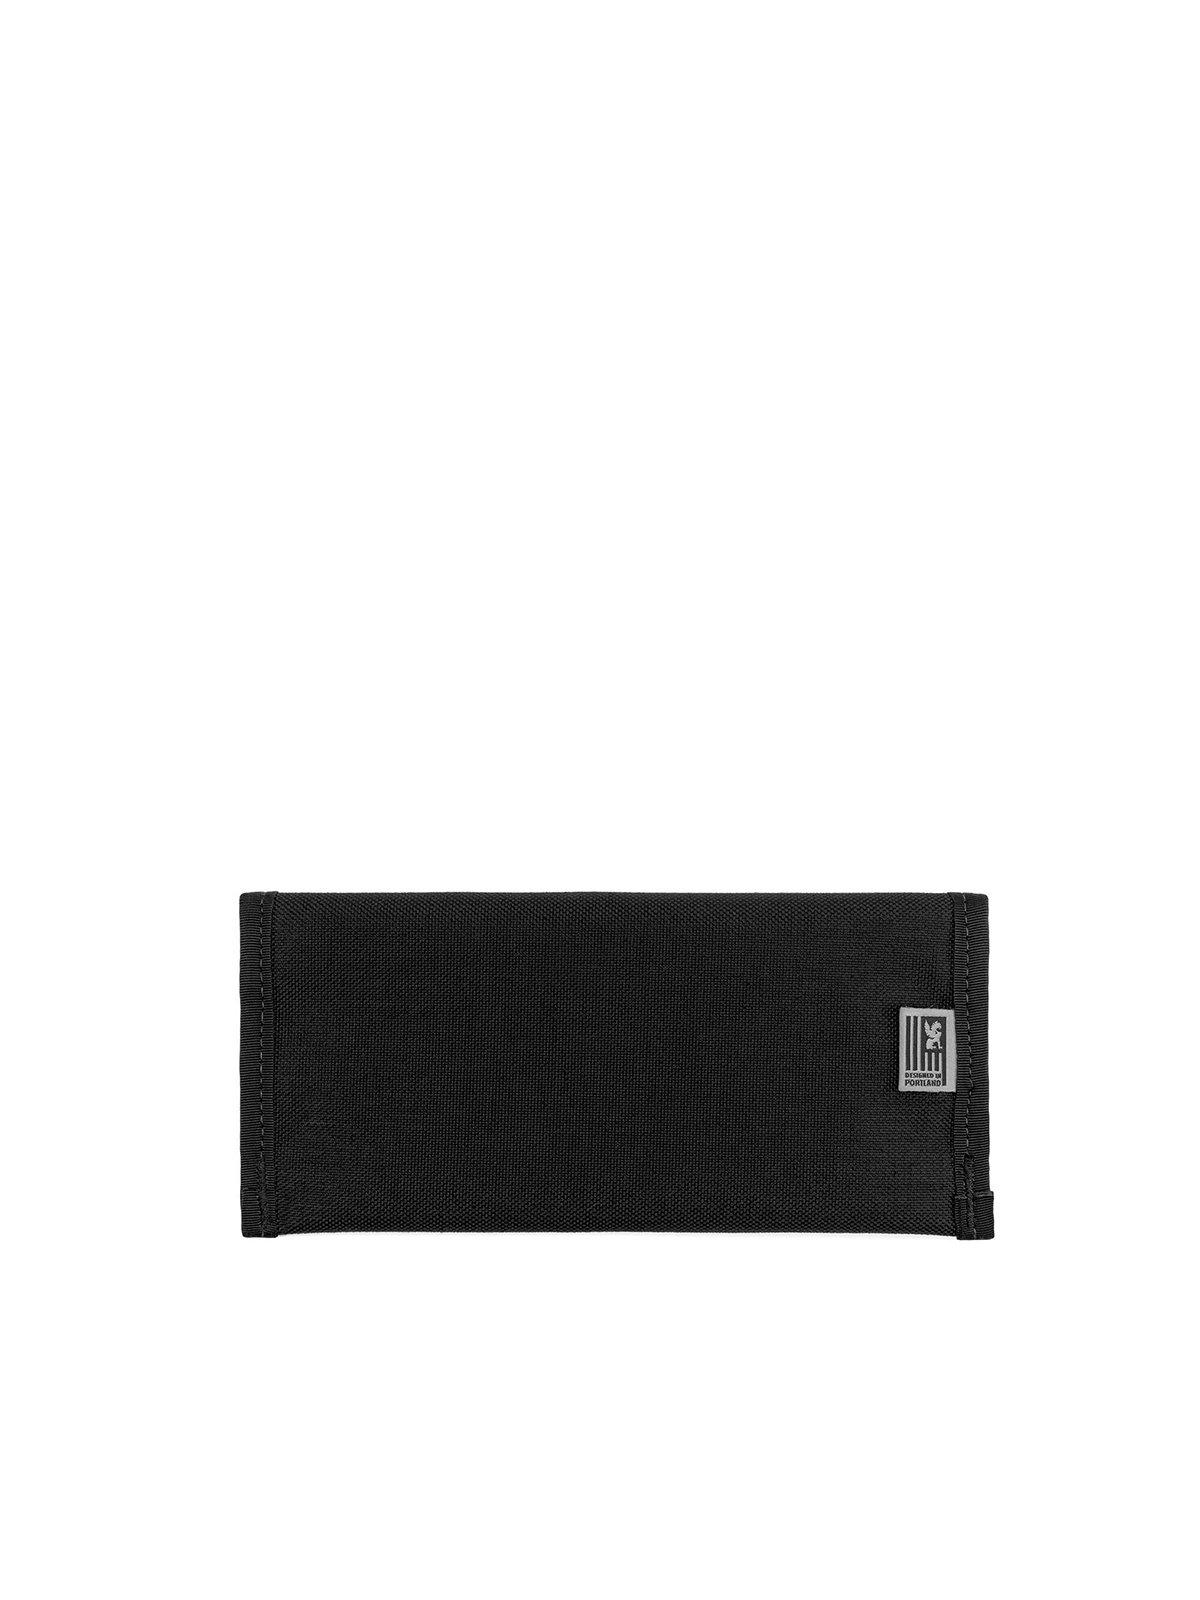 Chrome Industries Small Utility Pouch Black - MORE by Morello Indonesia